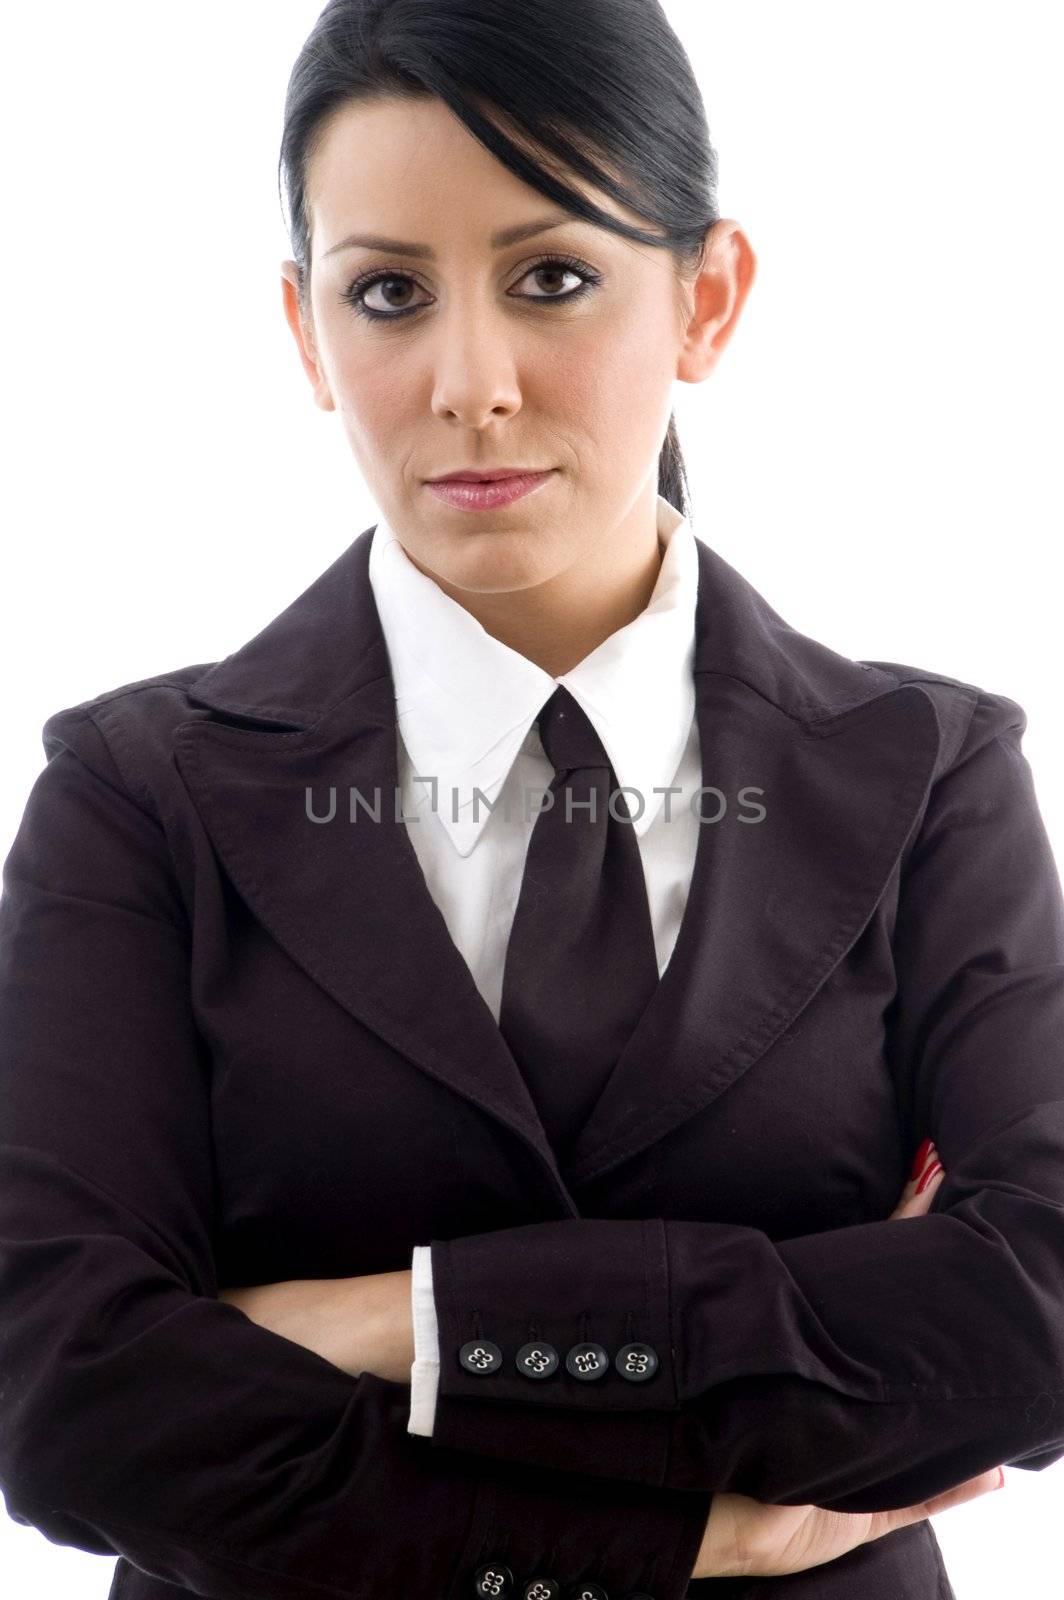 executive with crossed arms with white background